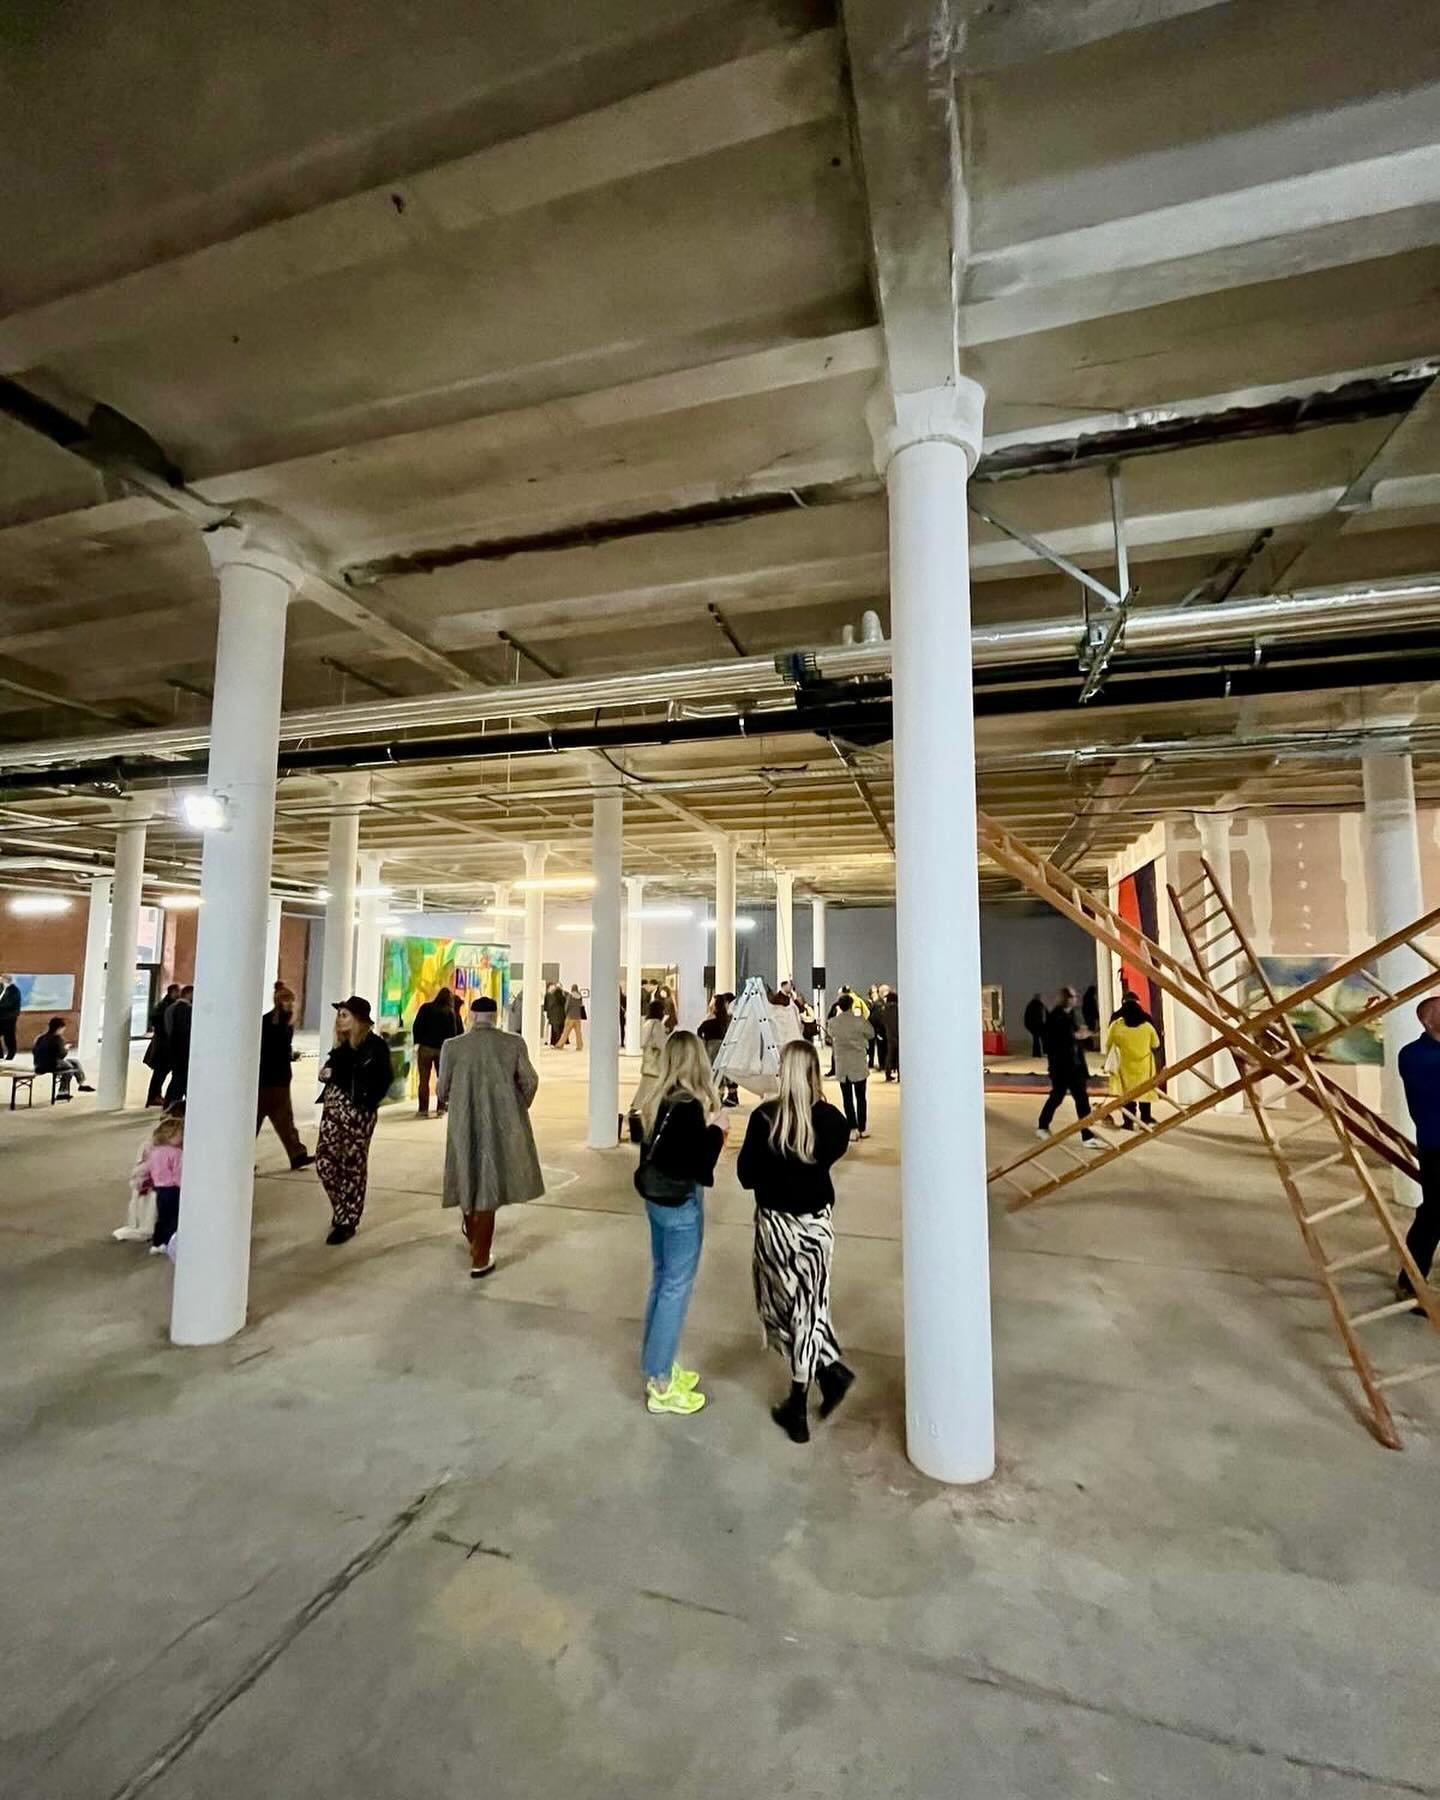 Shuffle exhibition at Tobacco Warehouse continues:
 
Sunday 28th April, 12pm - 6pm - with licensed bar 
Saturday 4th May, 12pm - 6pm
Sunday 5th May, 12pm - 6pm
Monday 6th May, 12pm - 6pm
Saturday 11th May, 12pm - 6pm
Sunday 12th May, 12pm - 6pm

We h